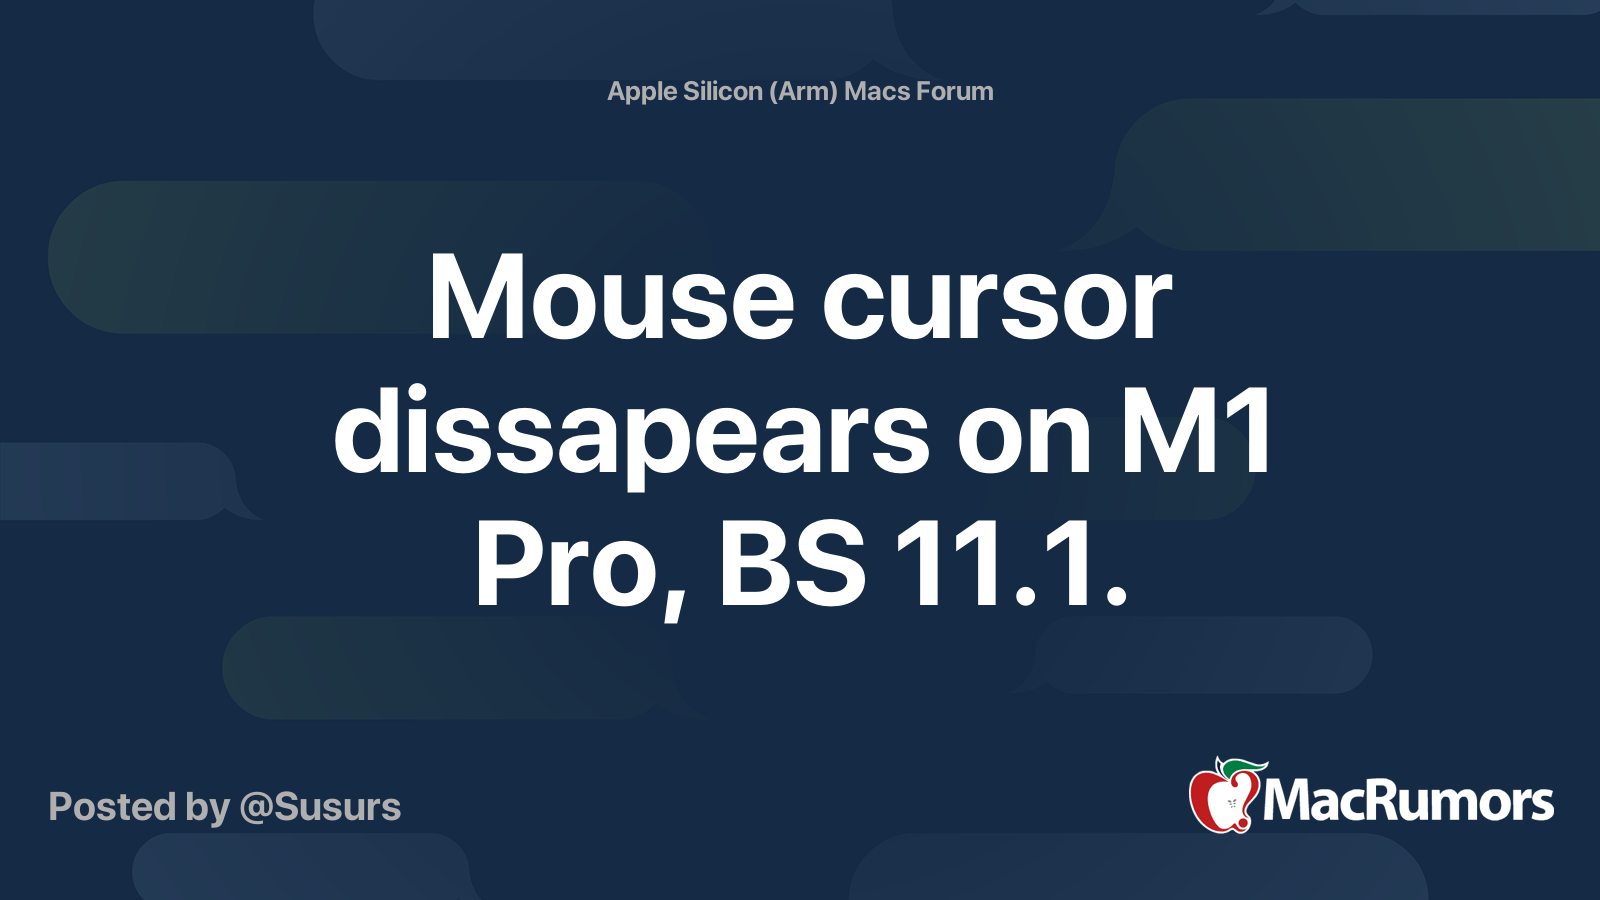 Mouse Cursor Dissapears On M1 Pro Bs 11 1 Macrumors Forums - roblox mouse cursor disappears